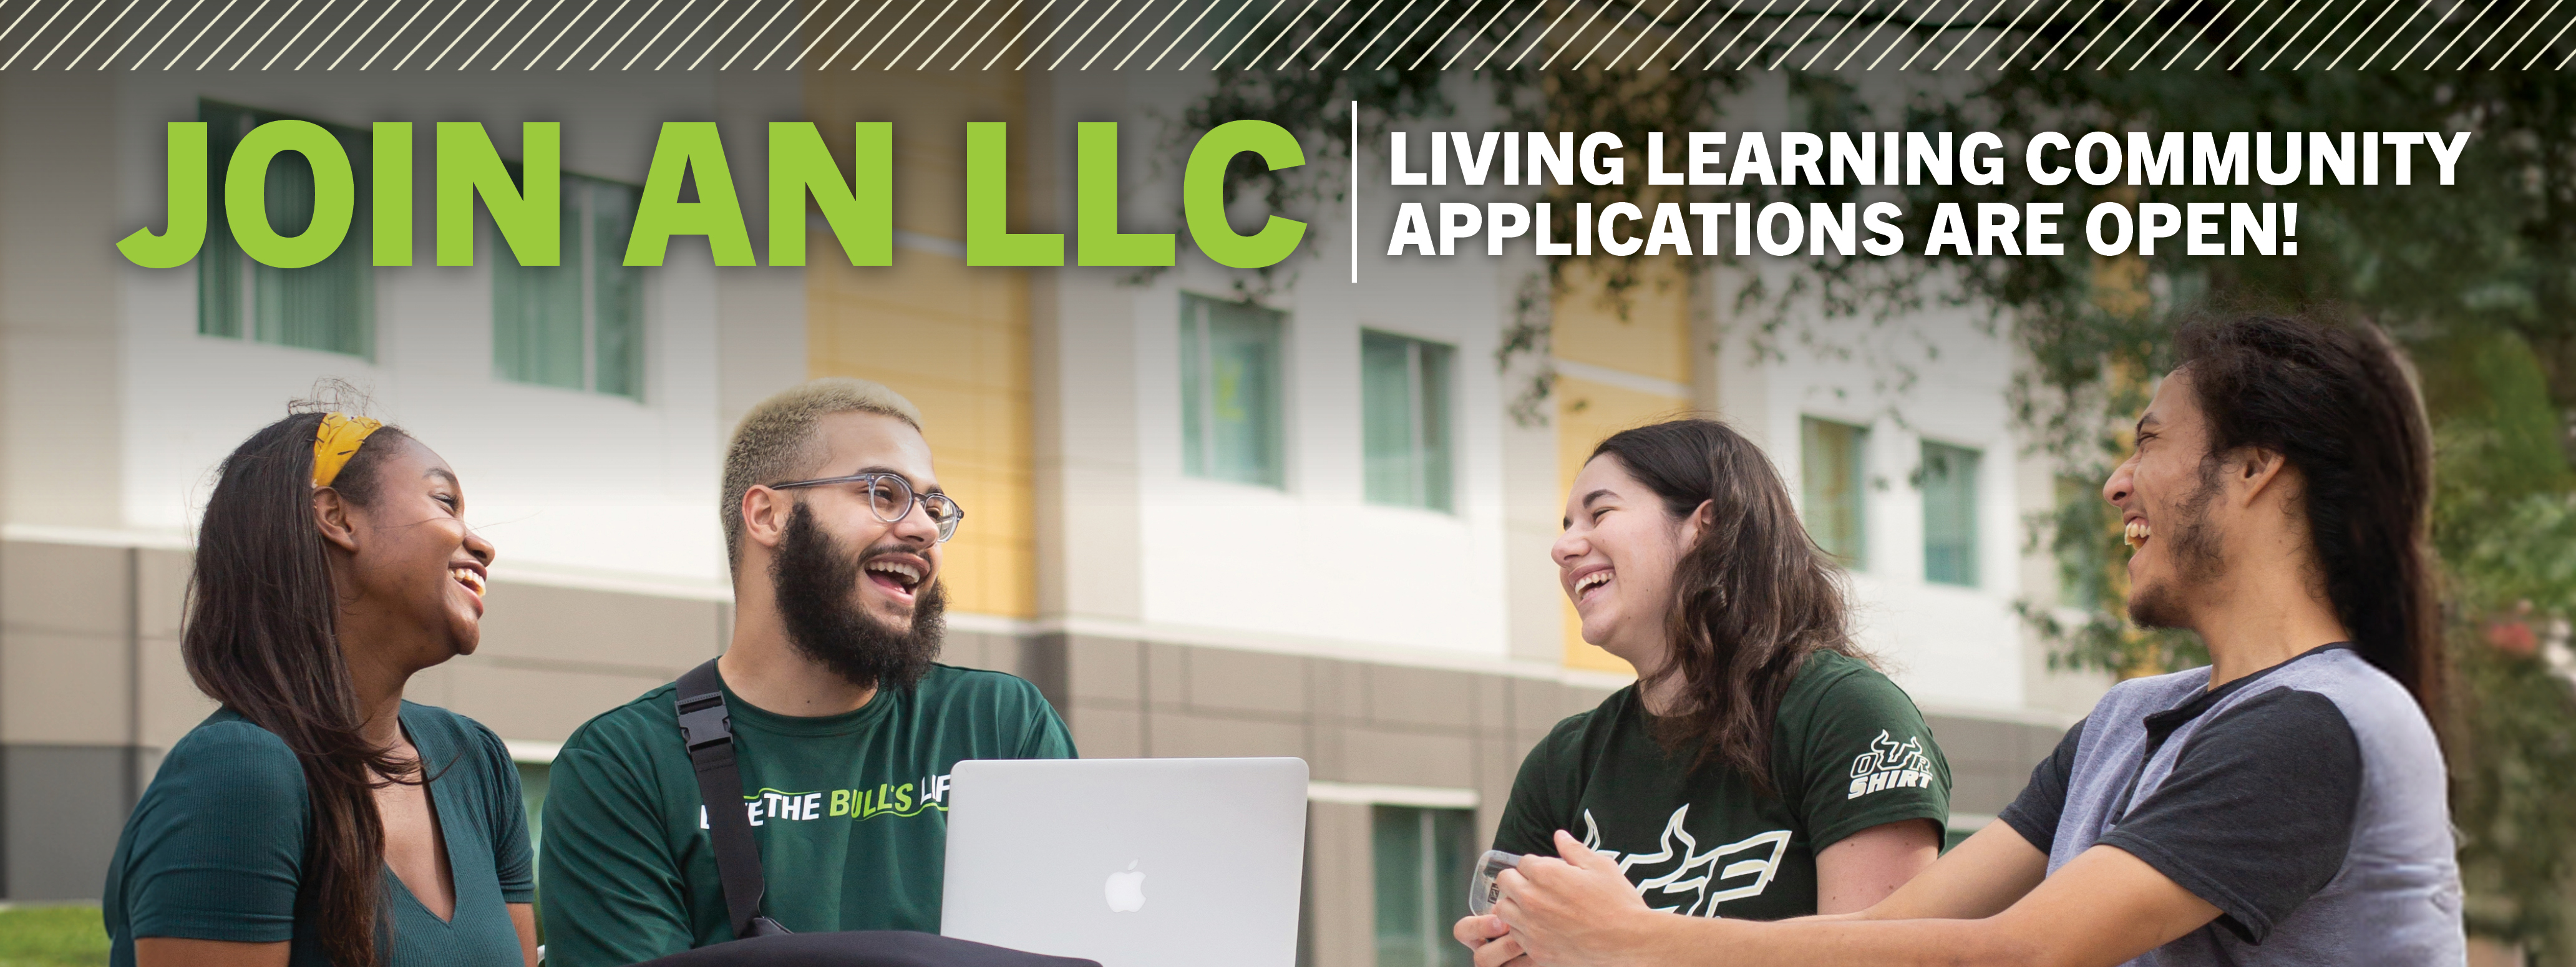 Join an LLC. Living Learning Community Applications Are Open